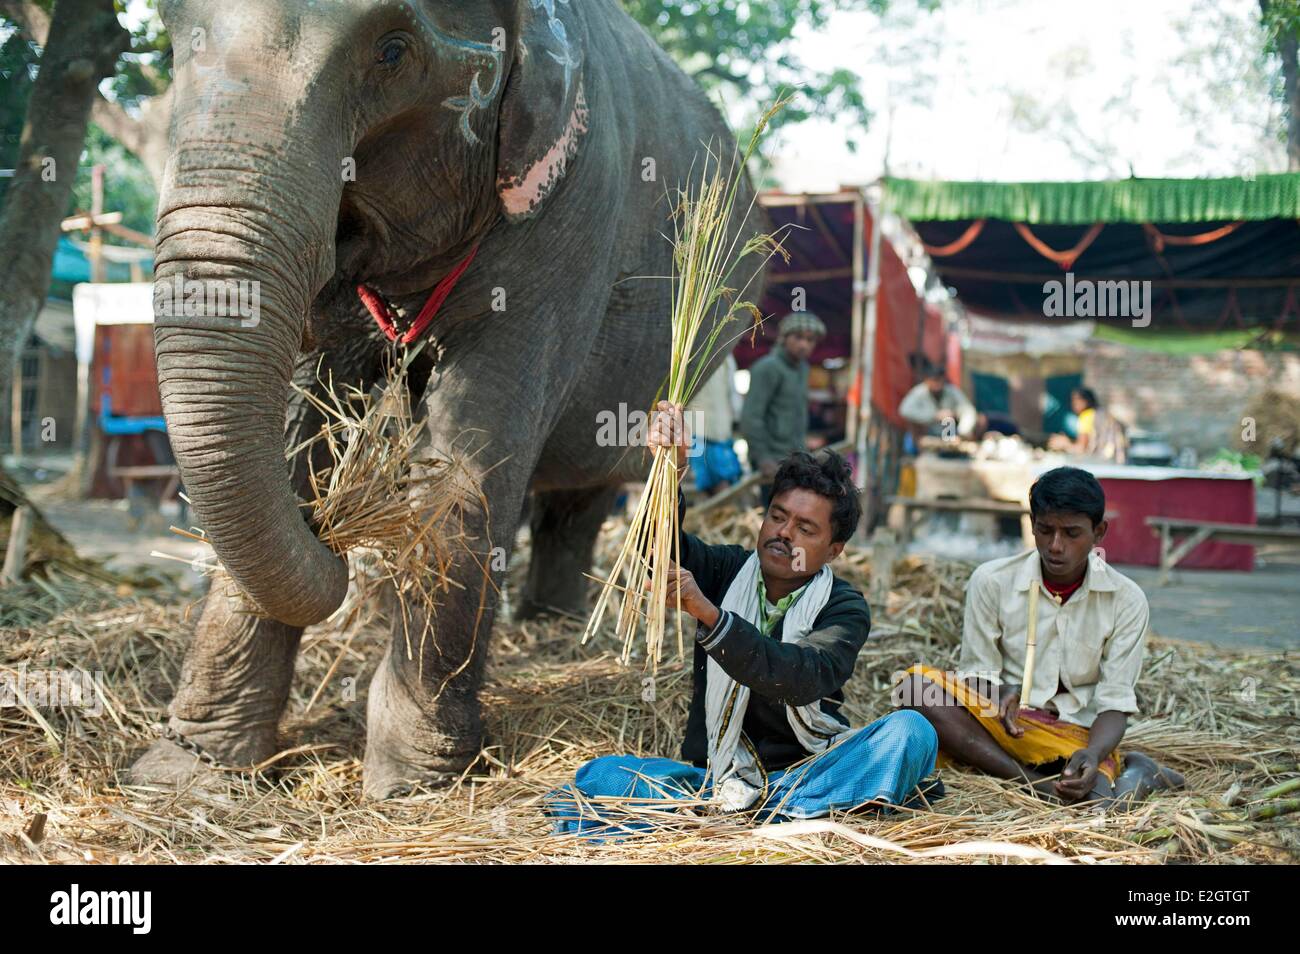 India Bihar state Patna Sonepur Sonepur Mela Cattle Fait (largest in Asia) Mahout giving food to elephant Stock Photo